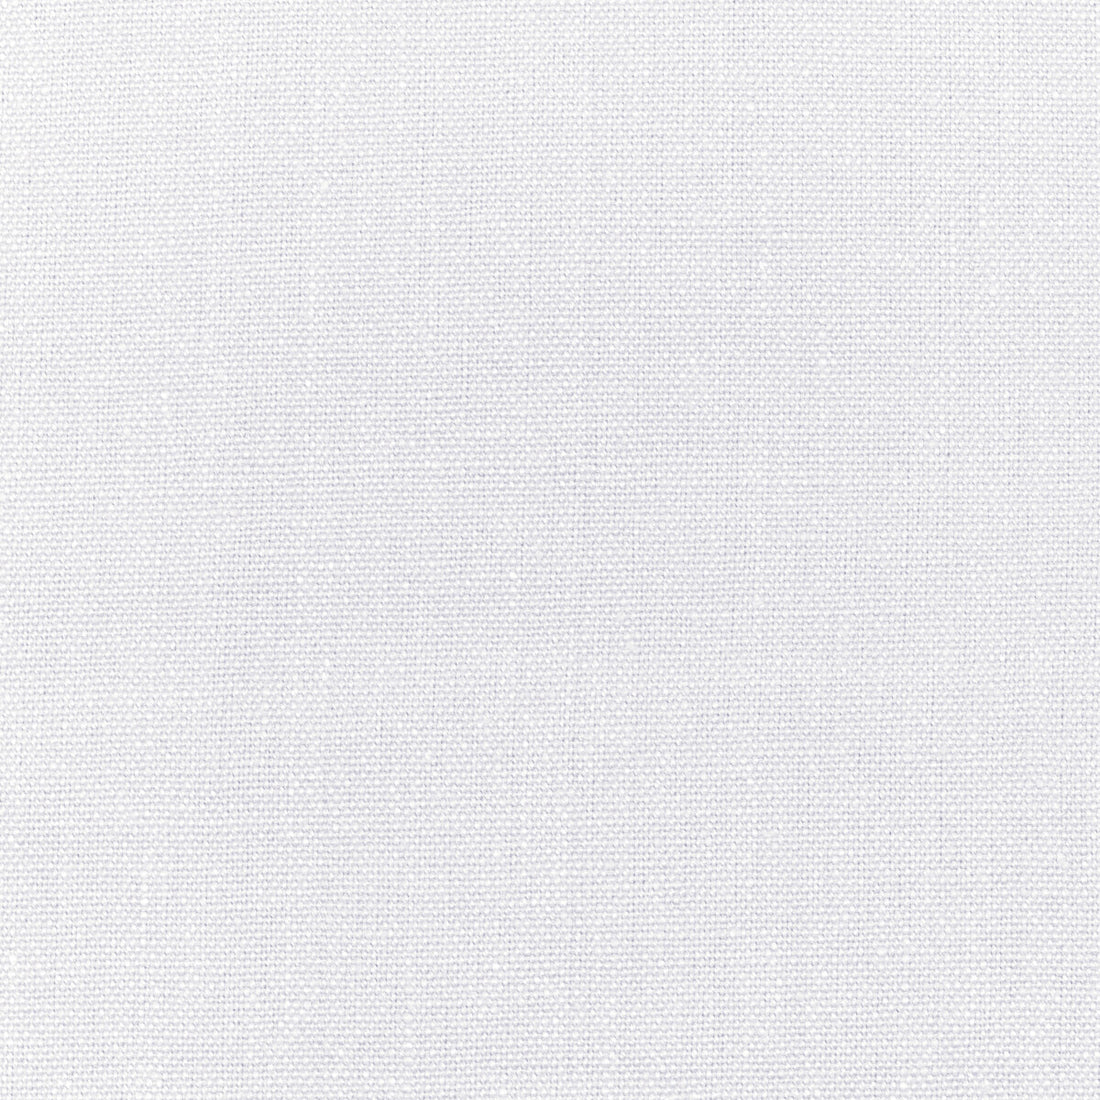 Watermill Linen fabric in optic white color - pattern 2012176.1110.0 - by Lee Jofa in the Colour Library VII collection